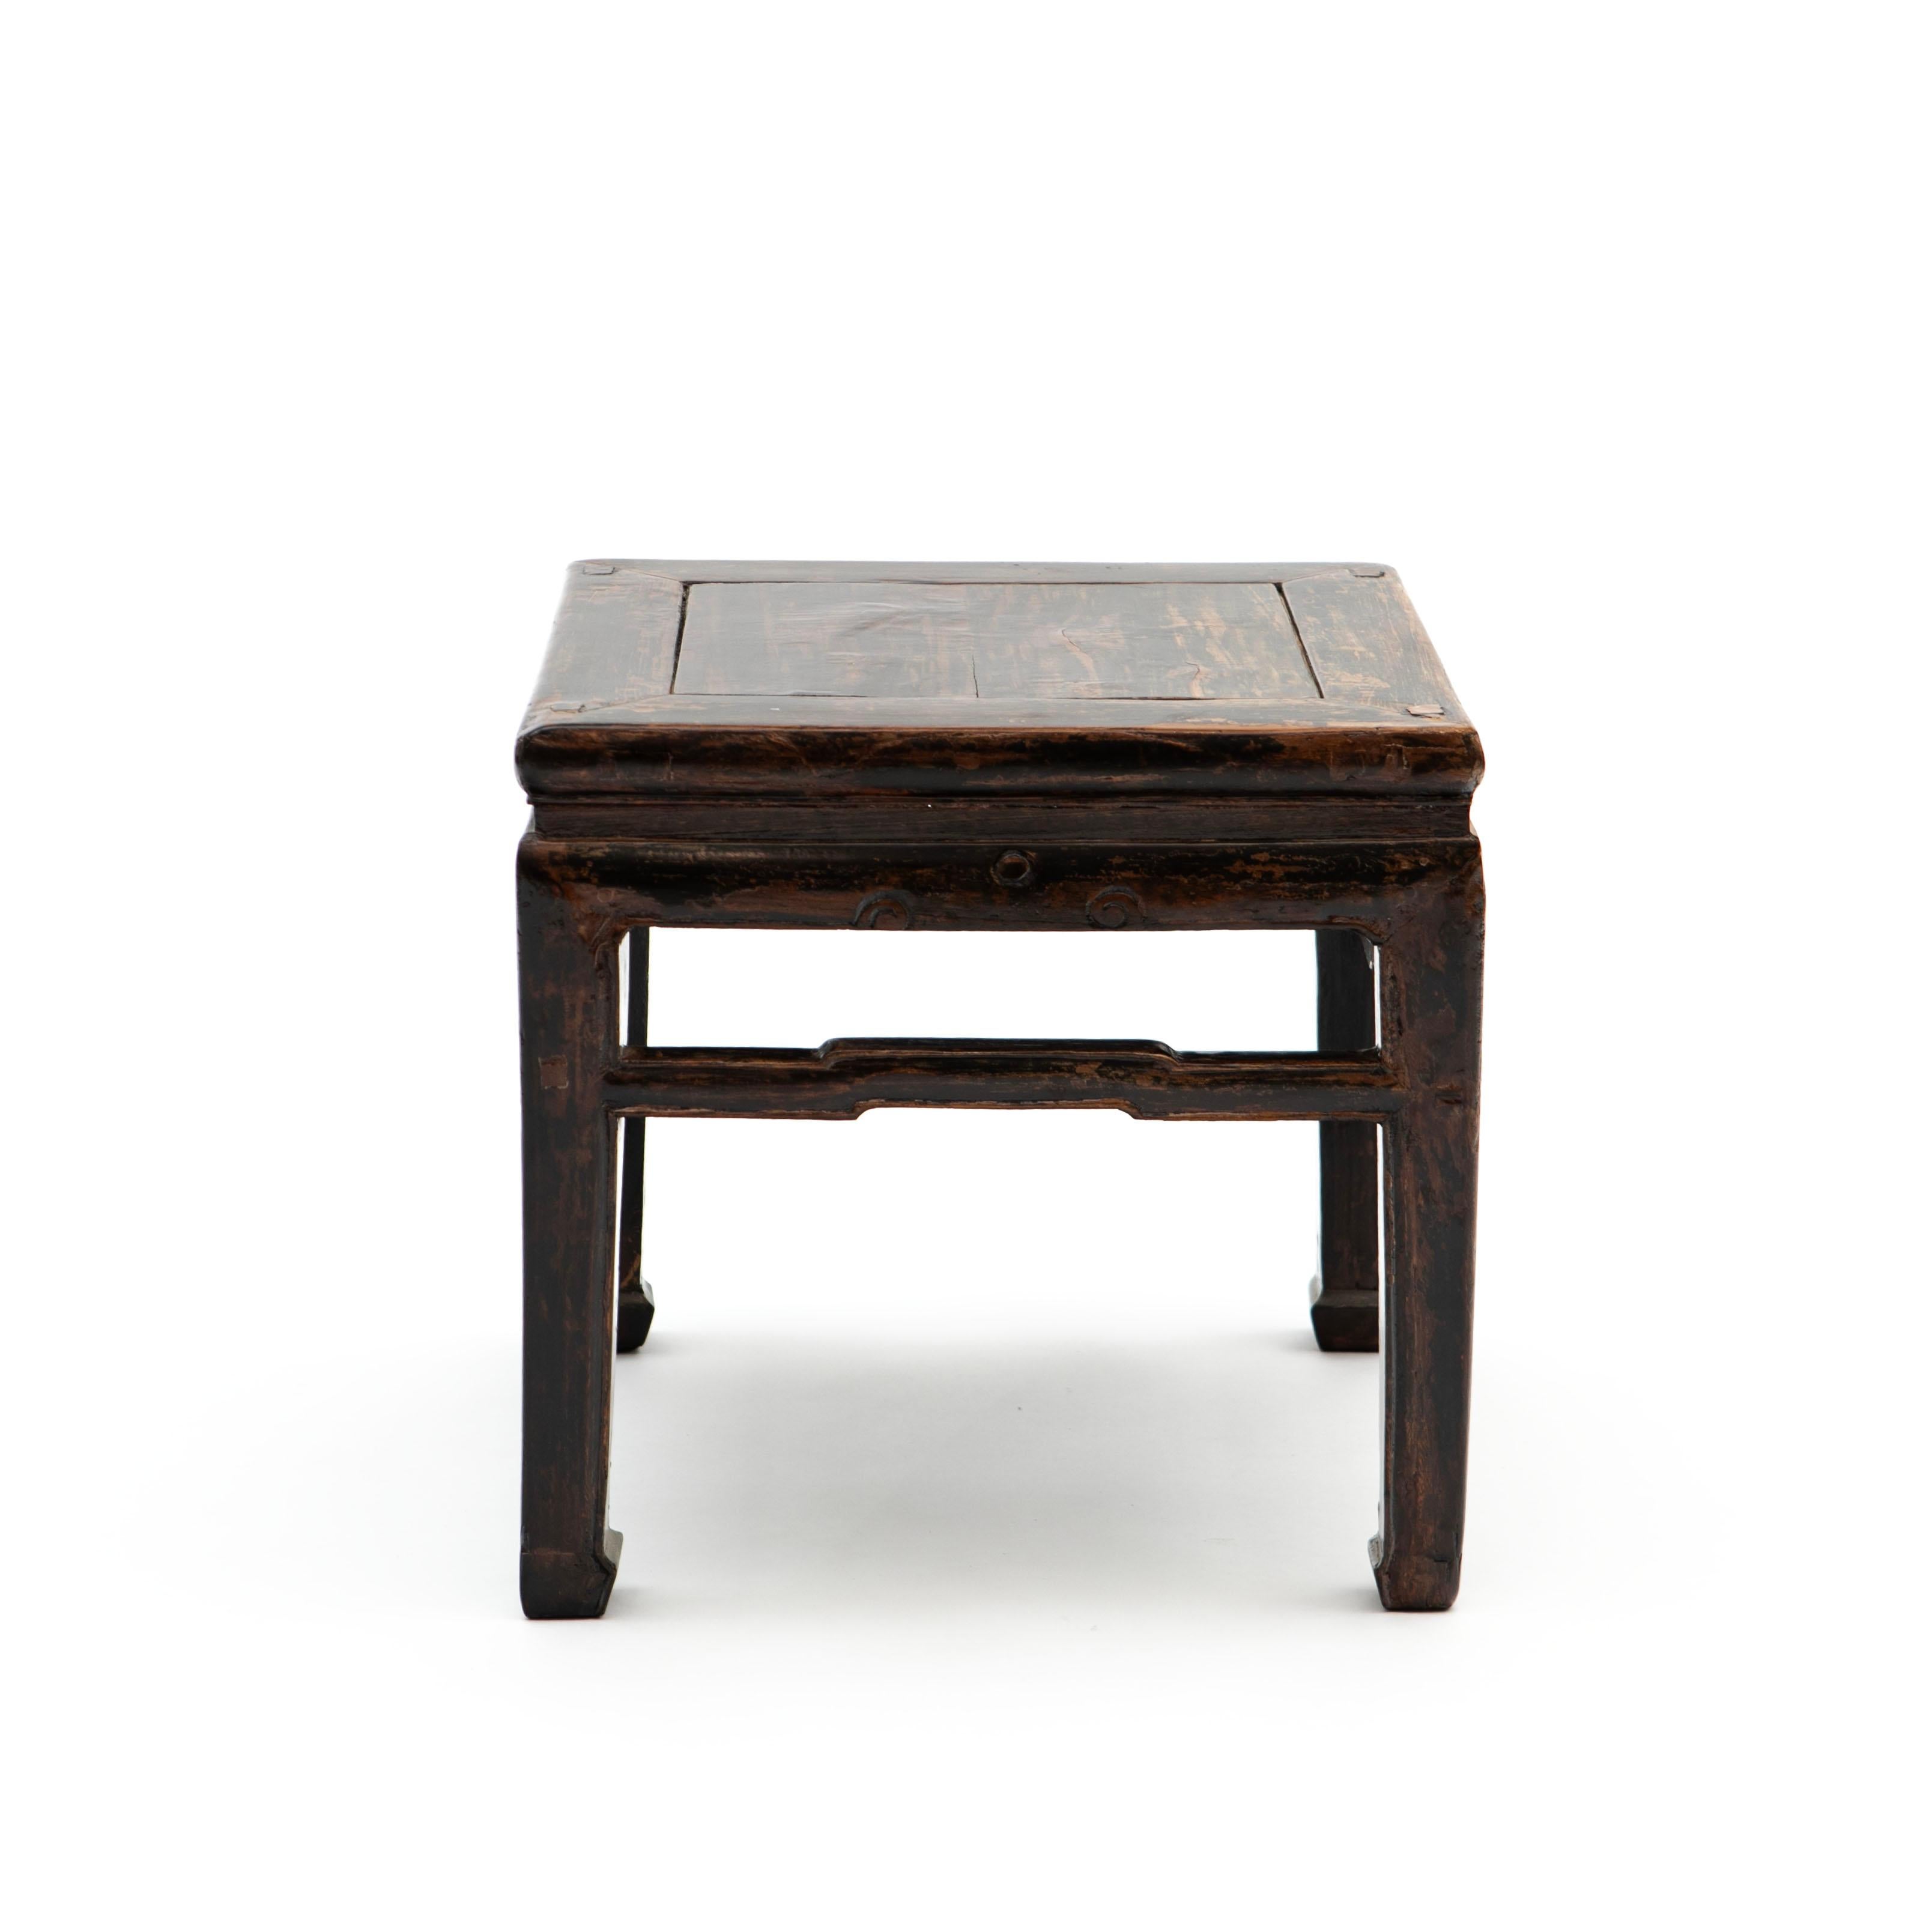 A Chinese antique ming style side lamp table from the late 19th century. Elm wood with original dark lacquer with natural age-related patina.
Features a square top with central board, sitting above a waisted apron raised on horse hoof feet and